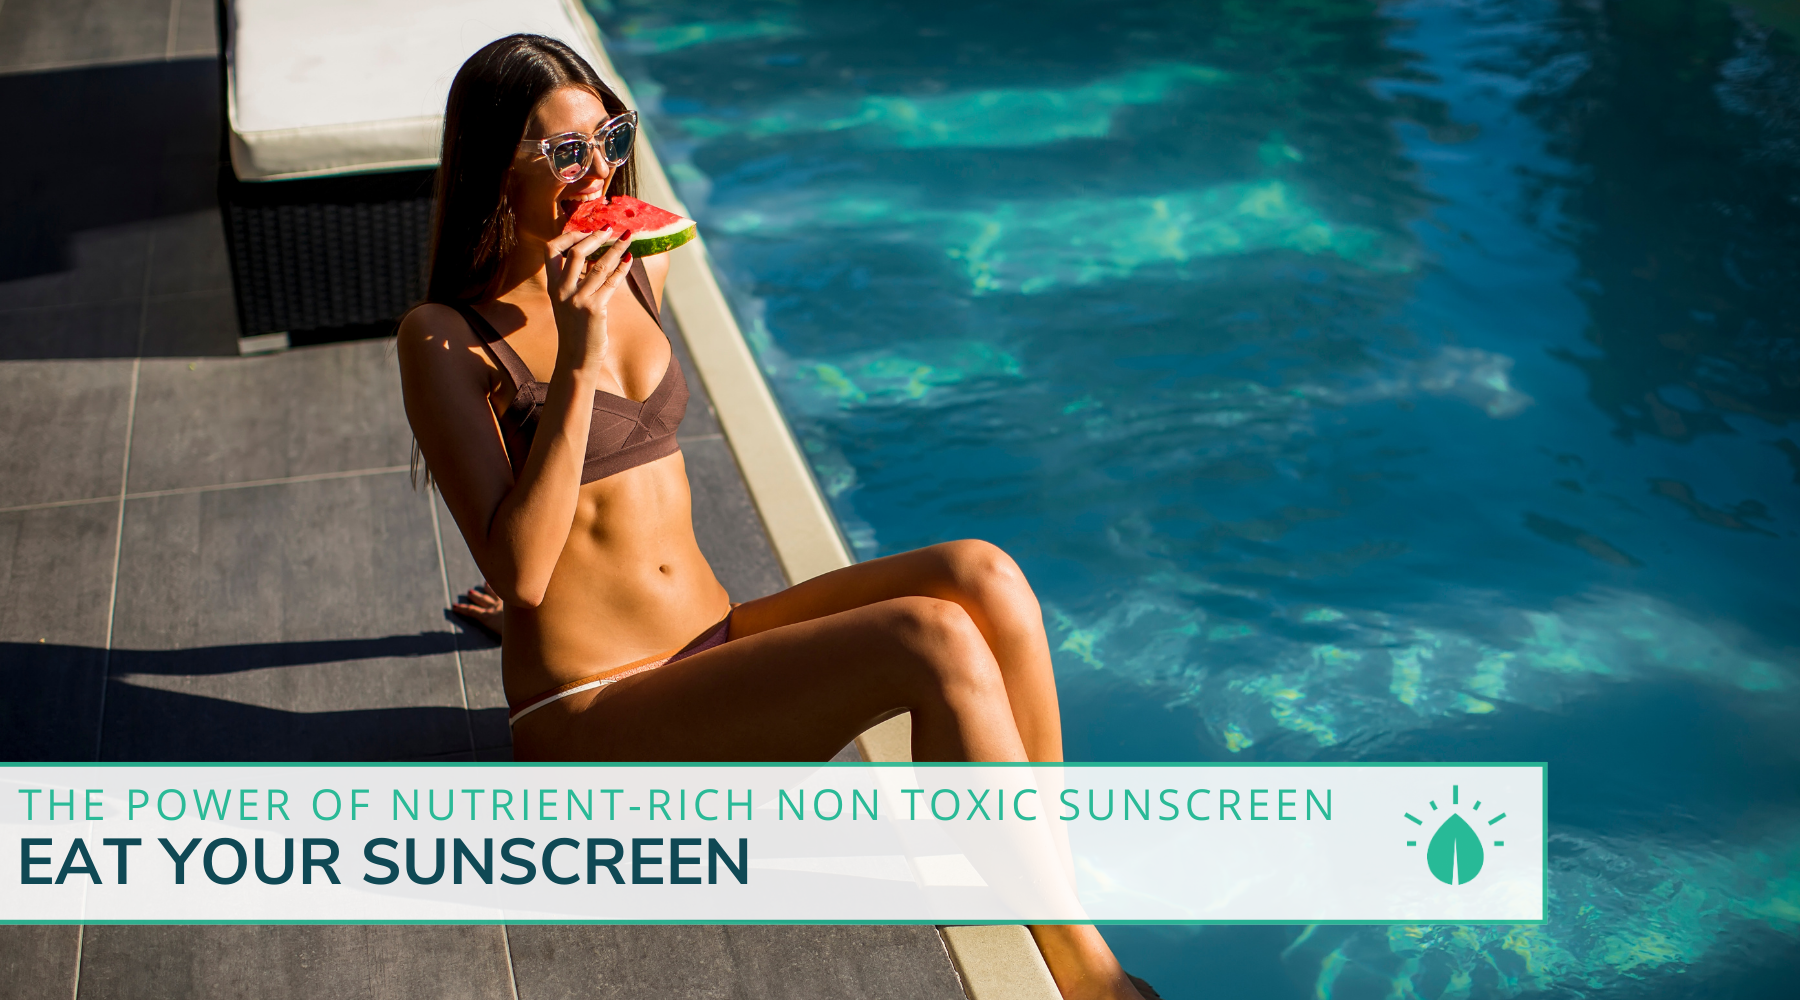 Eat Your Sunscreen: The Power of Nutrient-Rich Non Toxic Sunscreen